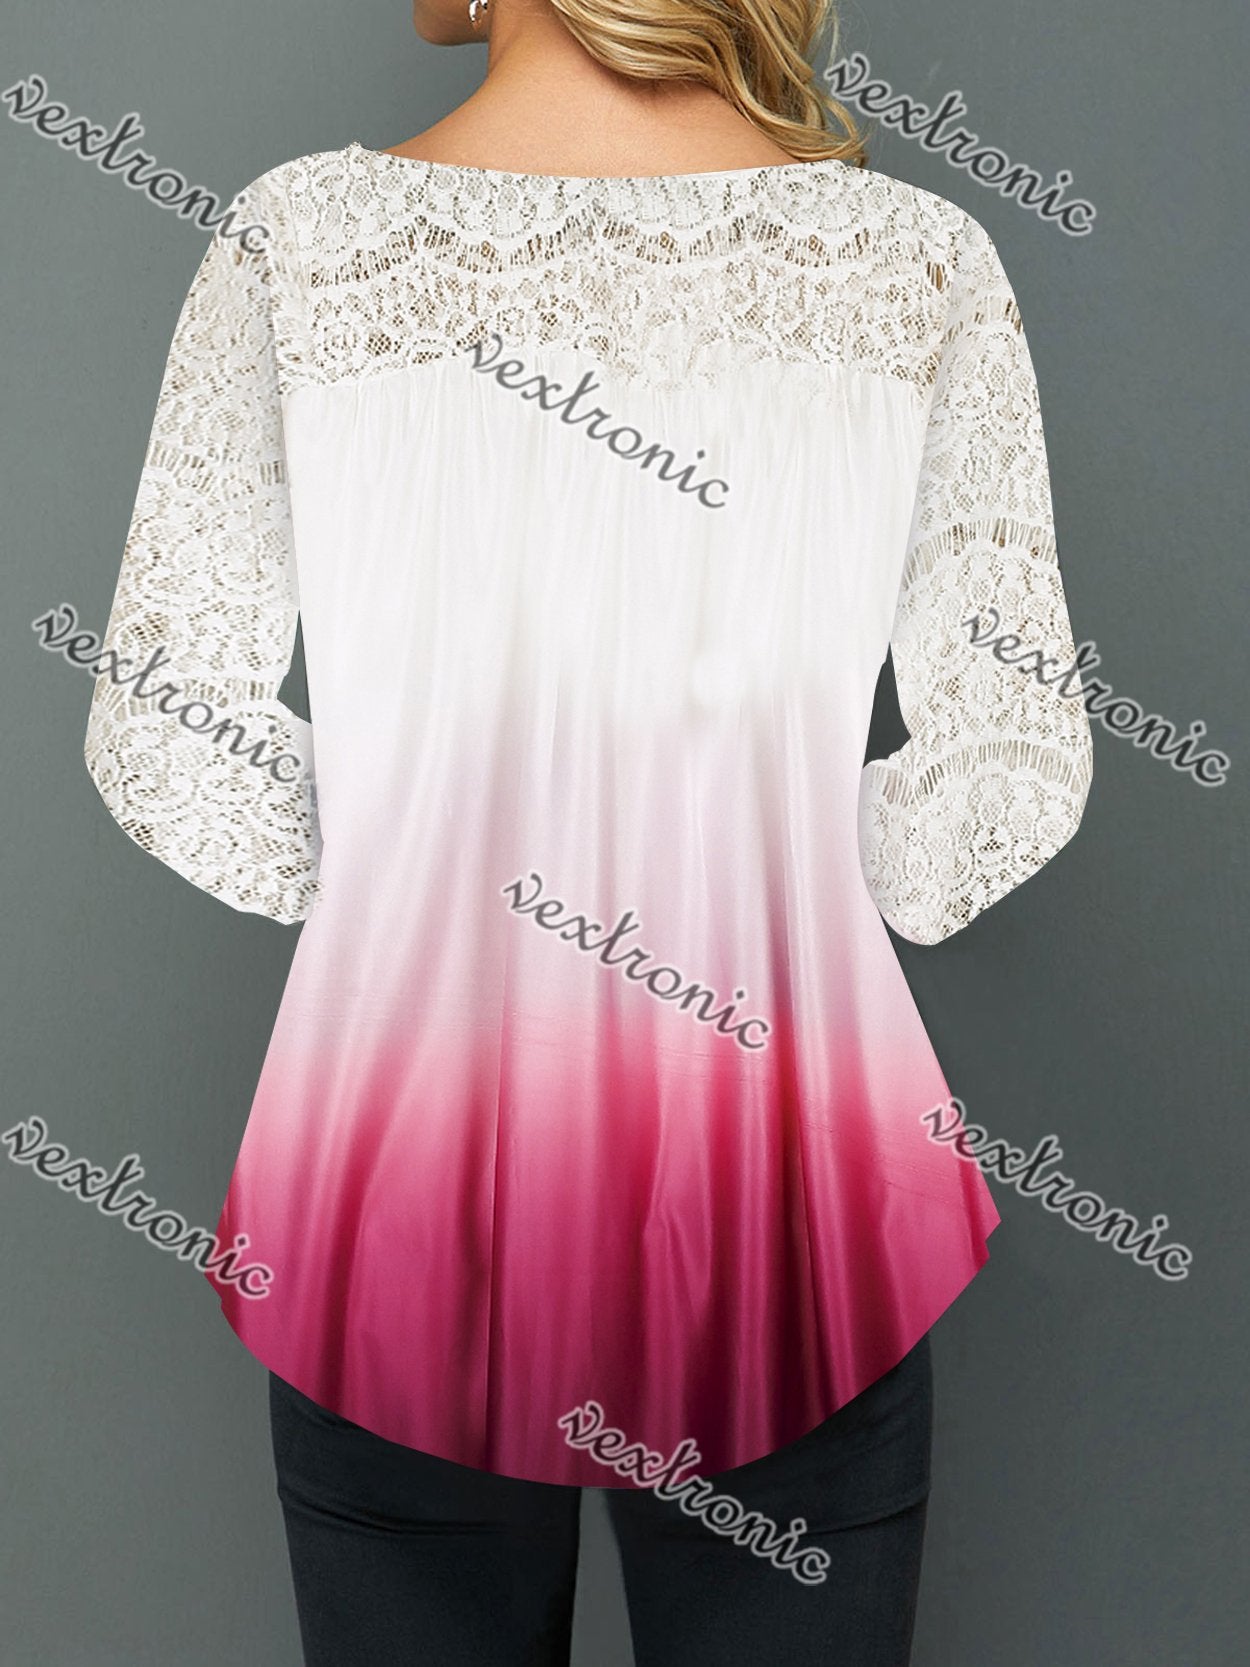 Women 3/4 Sleeve Scoop Neck Lace Stitching Top Dress